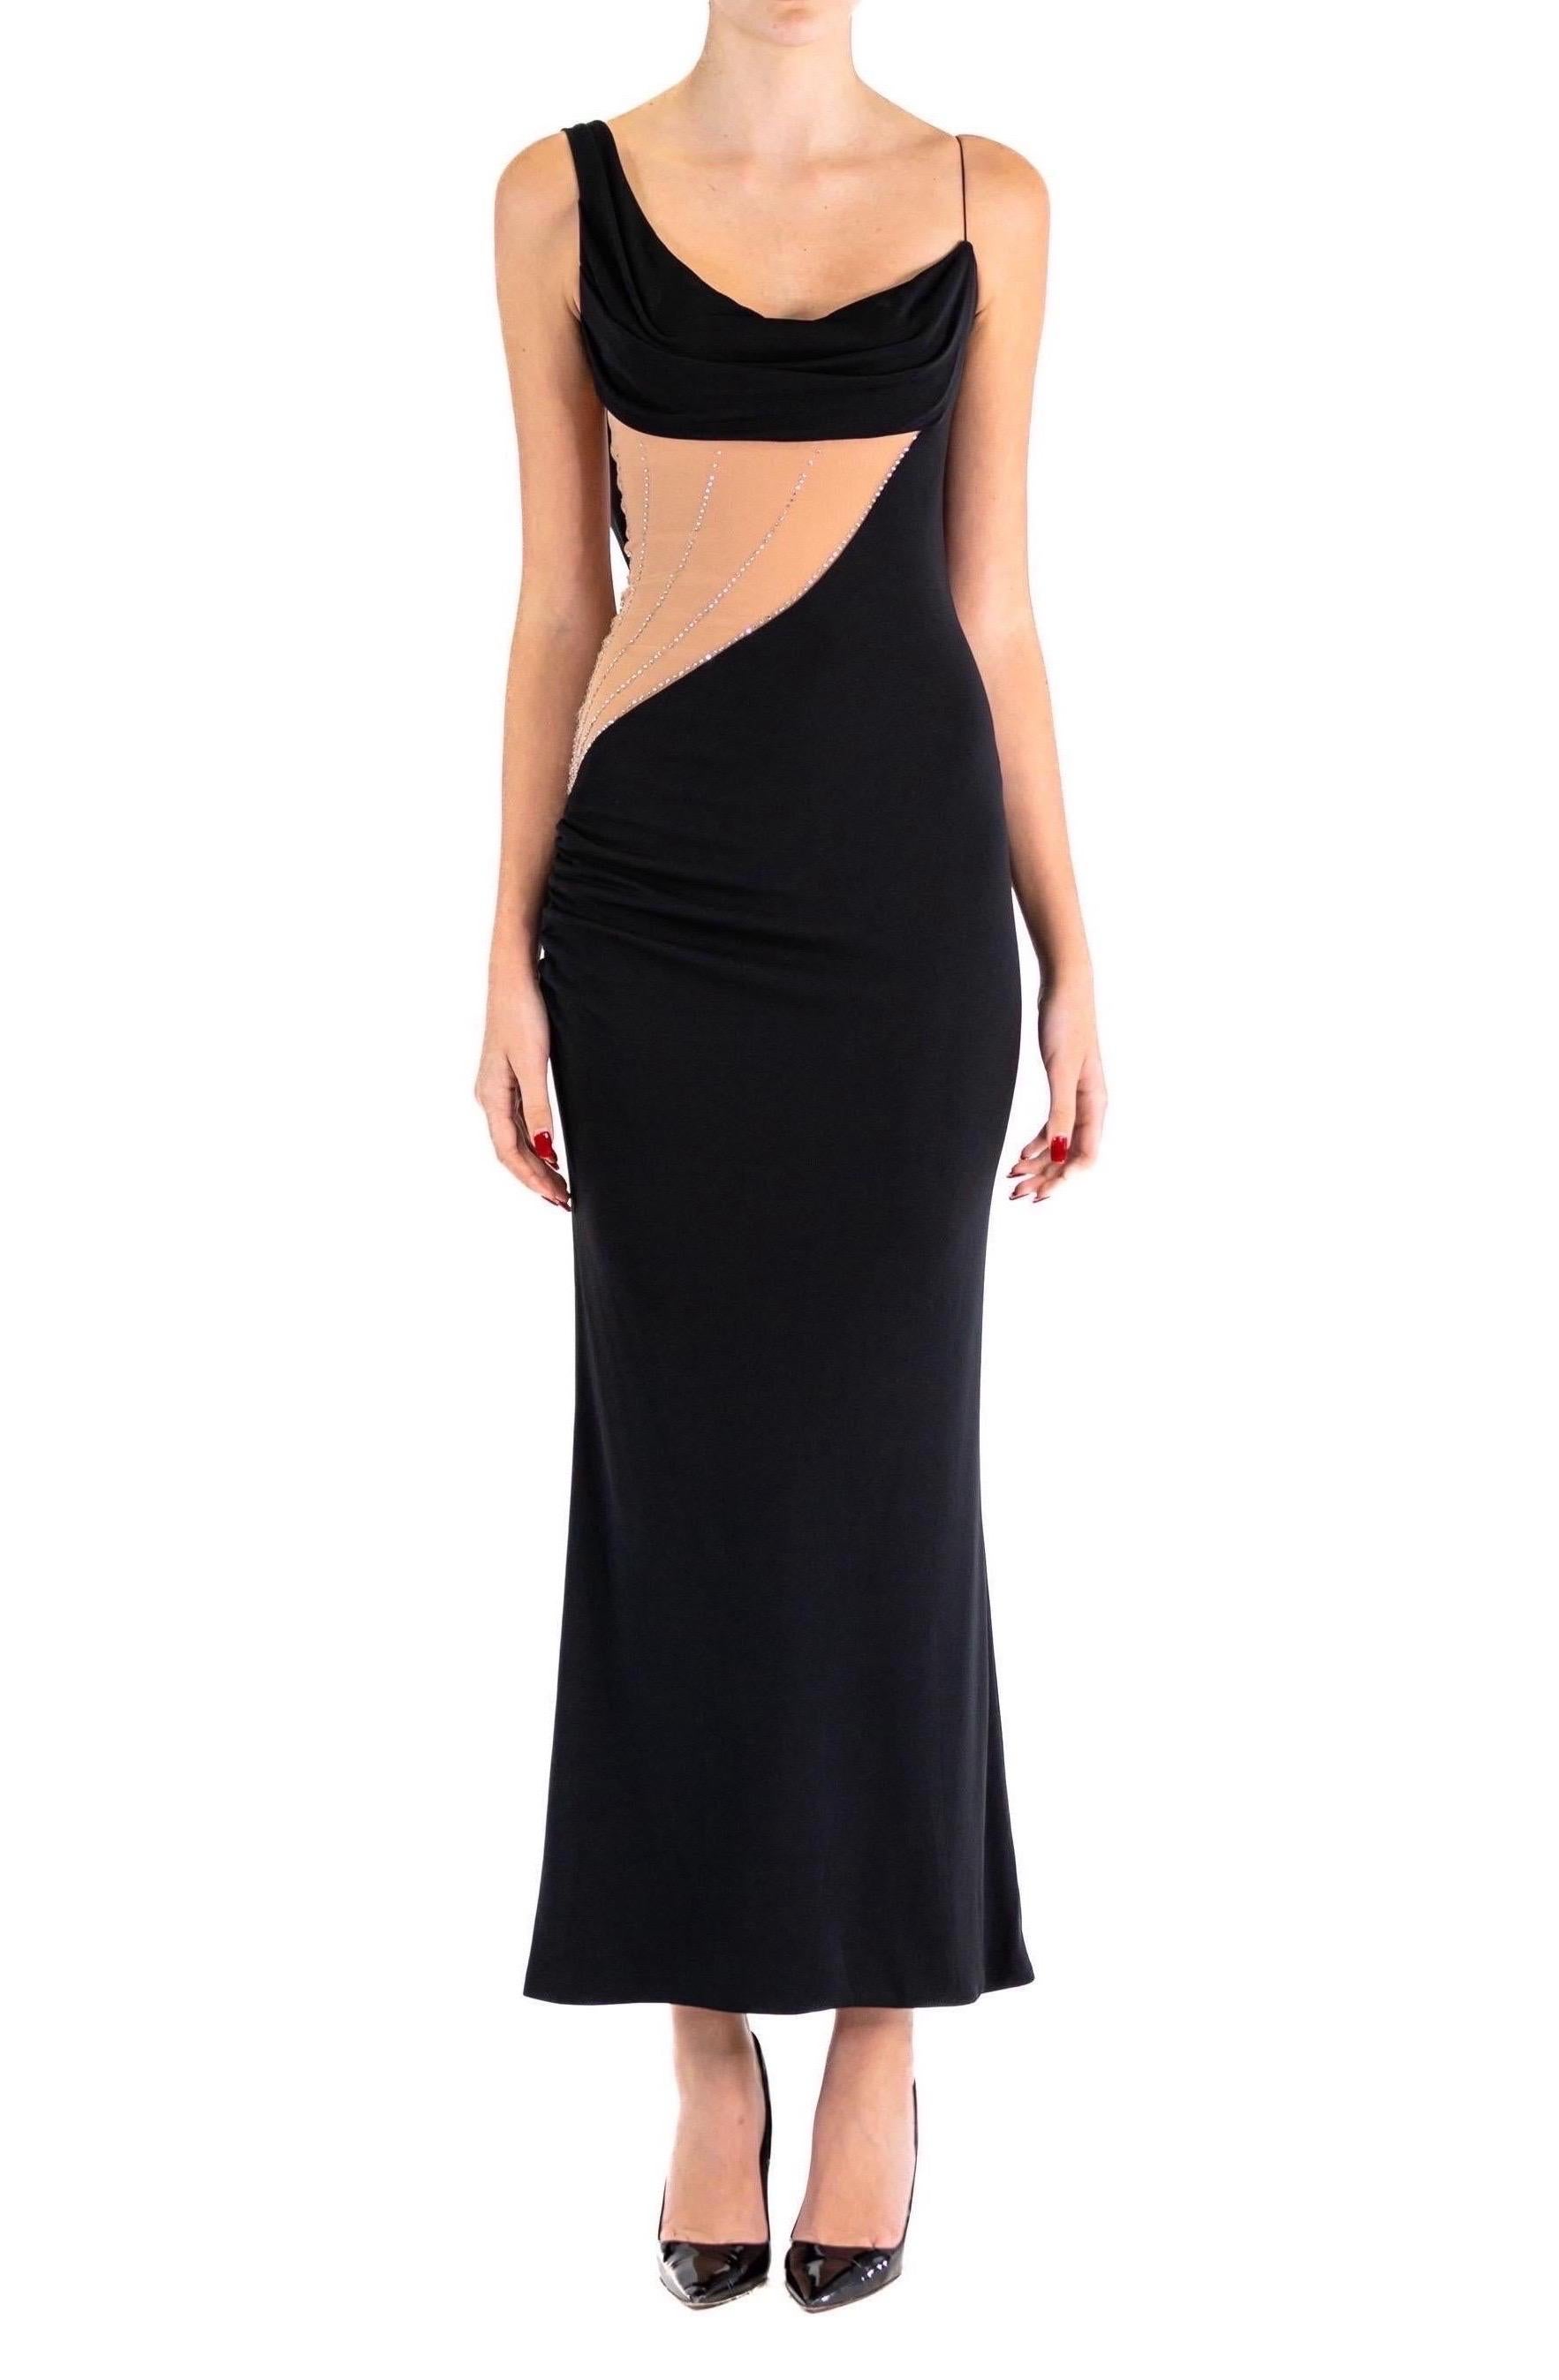 Structured Padded Bra Top 2000S JIKI Black Slinky Rayon Jersey One Shoulder Gown With Crystal Studded Nude Mesh Cutout 